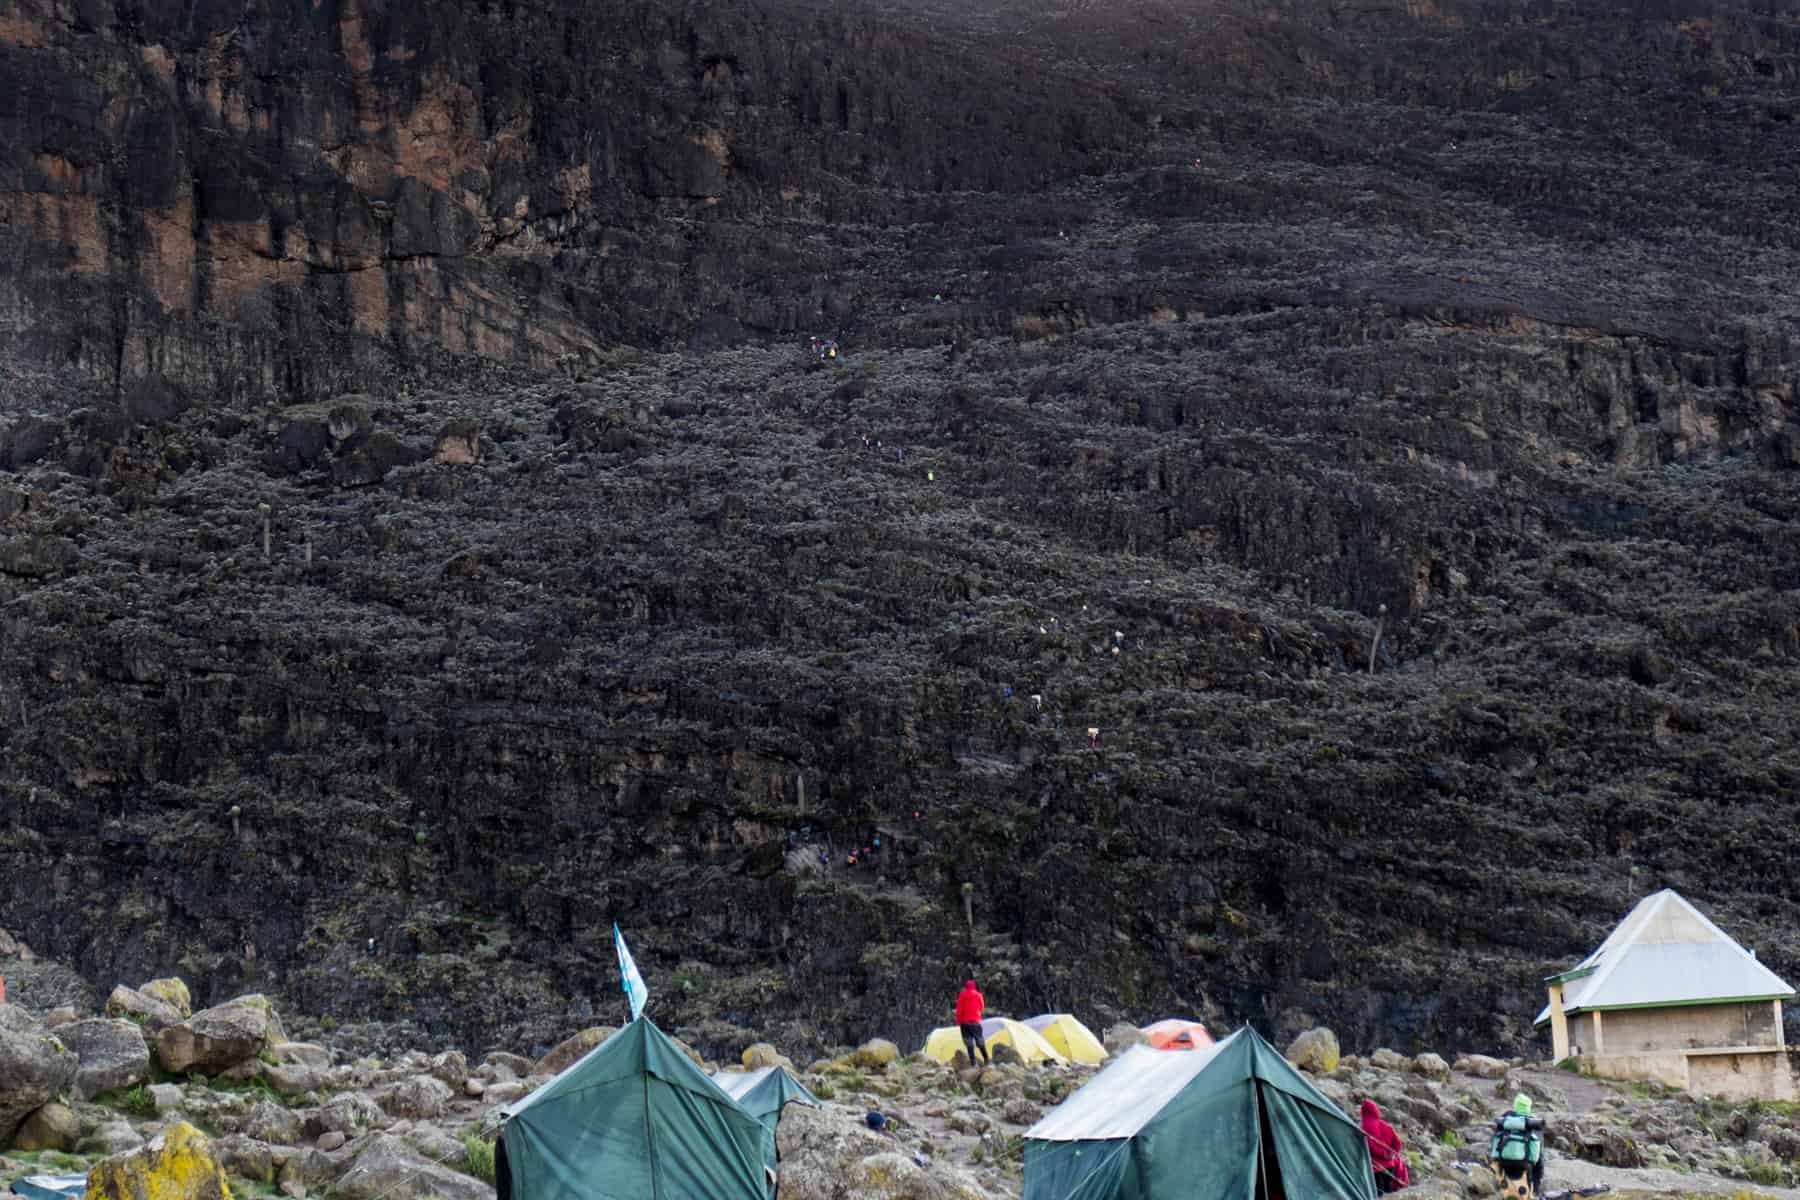 The high, dark steep Barranco wall that rises about camp tents, and a part of climbing Kilimanjaro